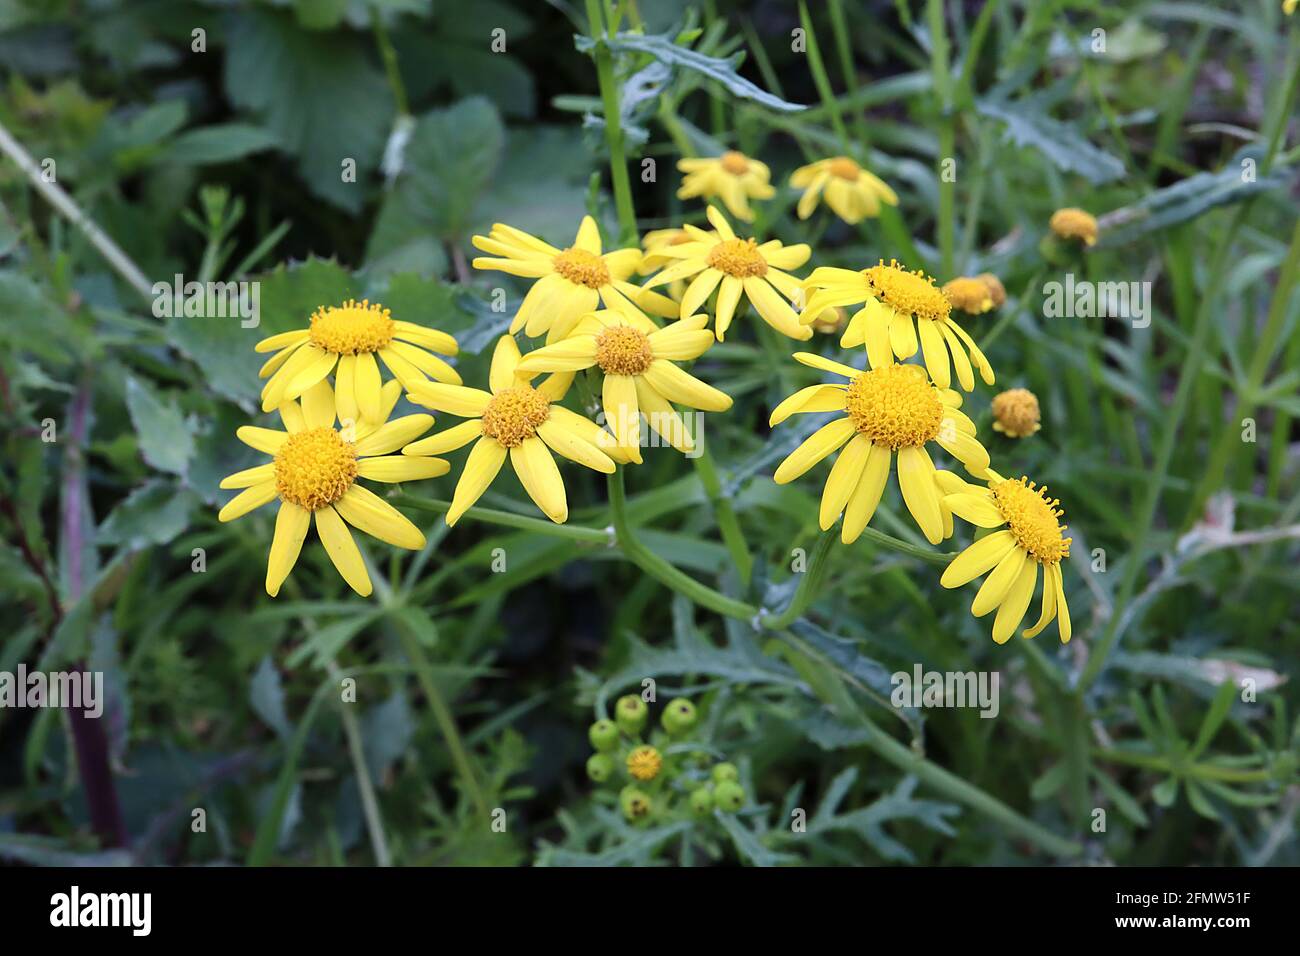 Senecio squalidus  Oxford ragwort – yellow daisy flower heads atop deeply lobed and toothed leaves,  May, England, UK Stock Photo